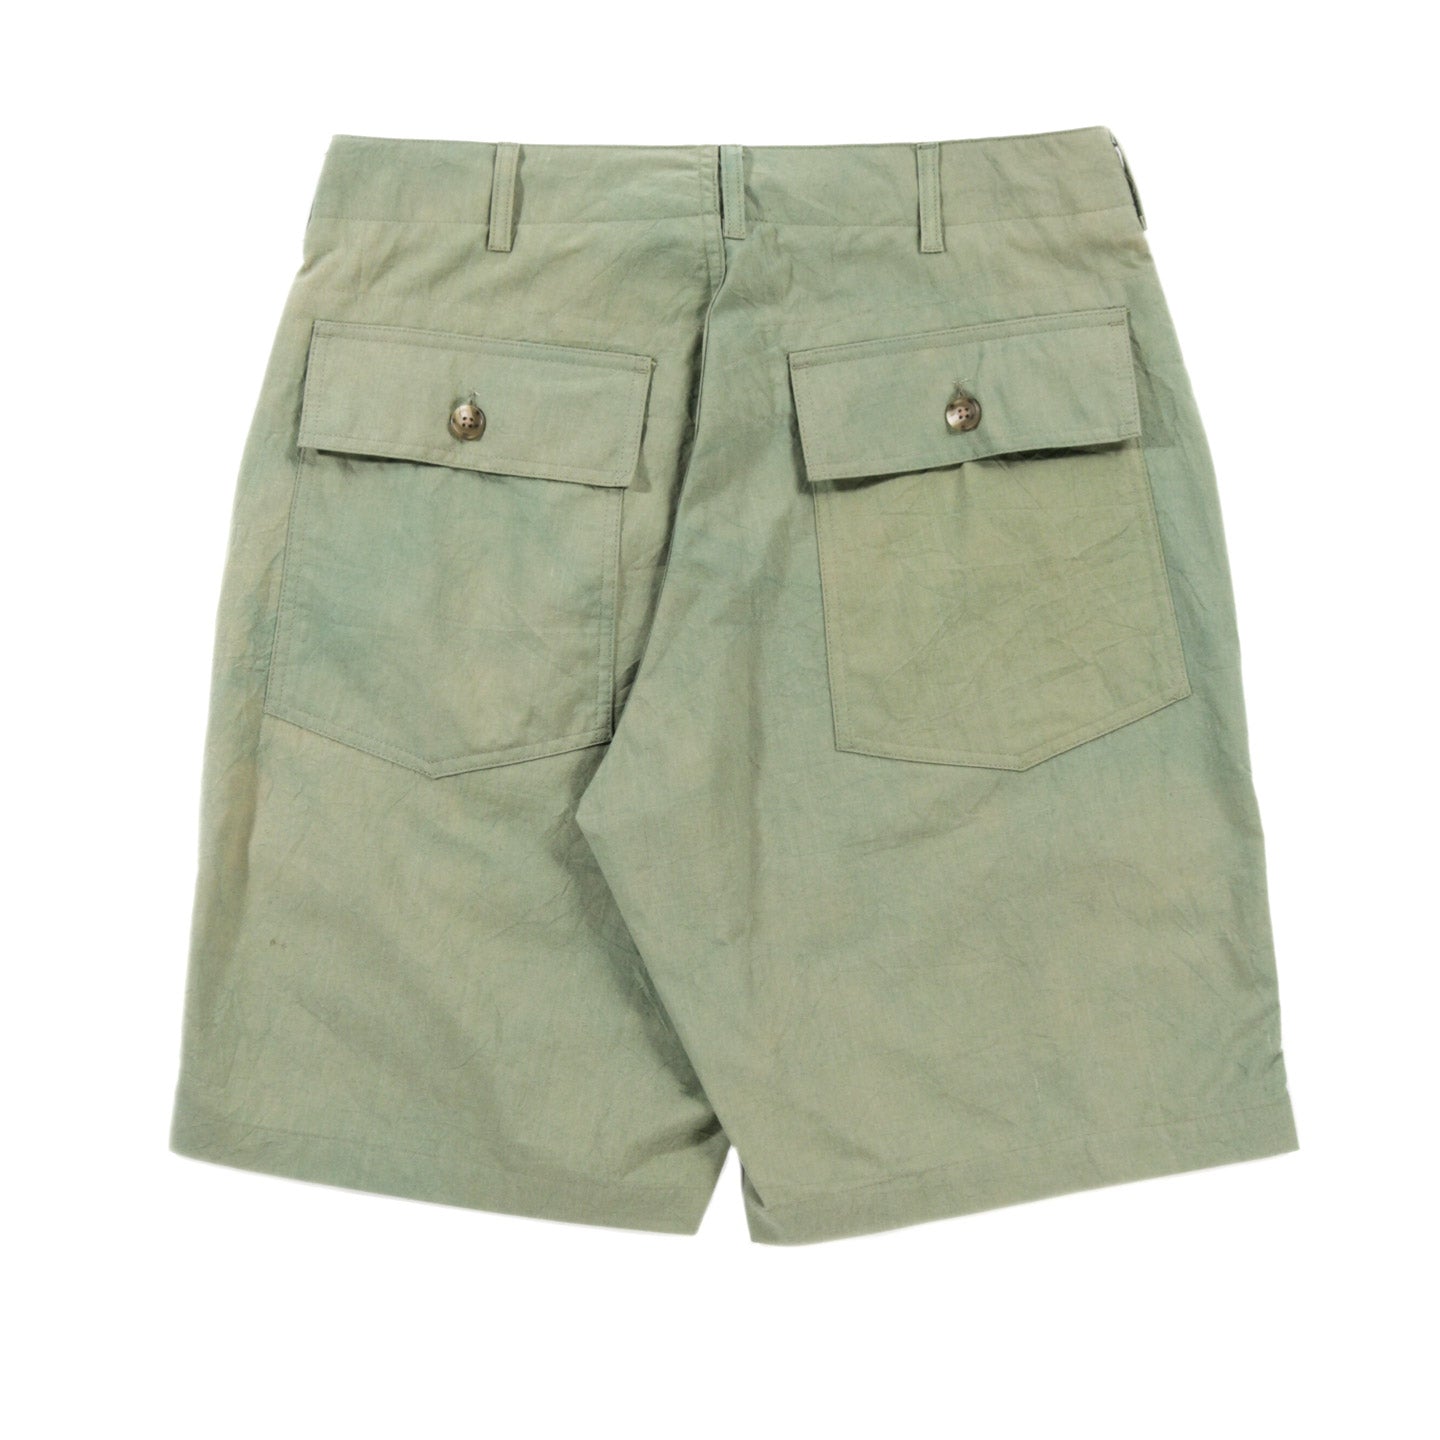 ENGINEERED GARMENTS FATIGUE SHORT OLIVE COTTON SHEETING | TODAY 